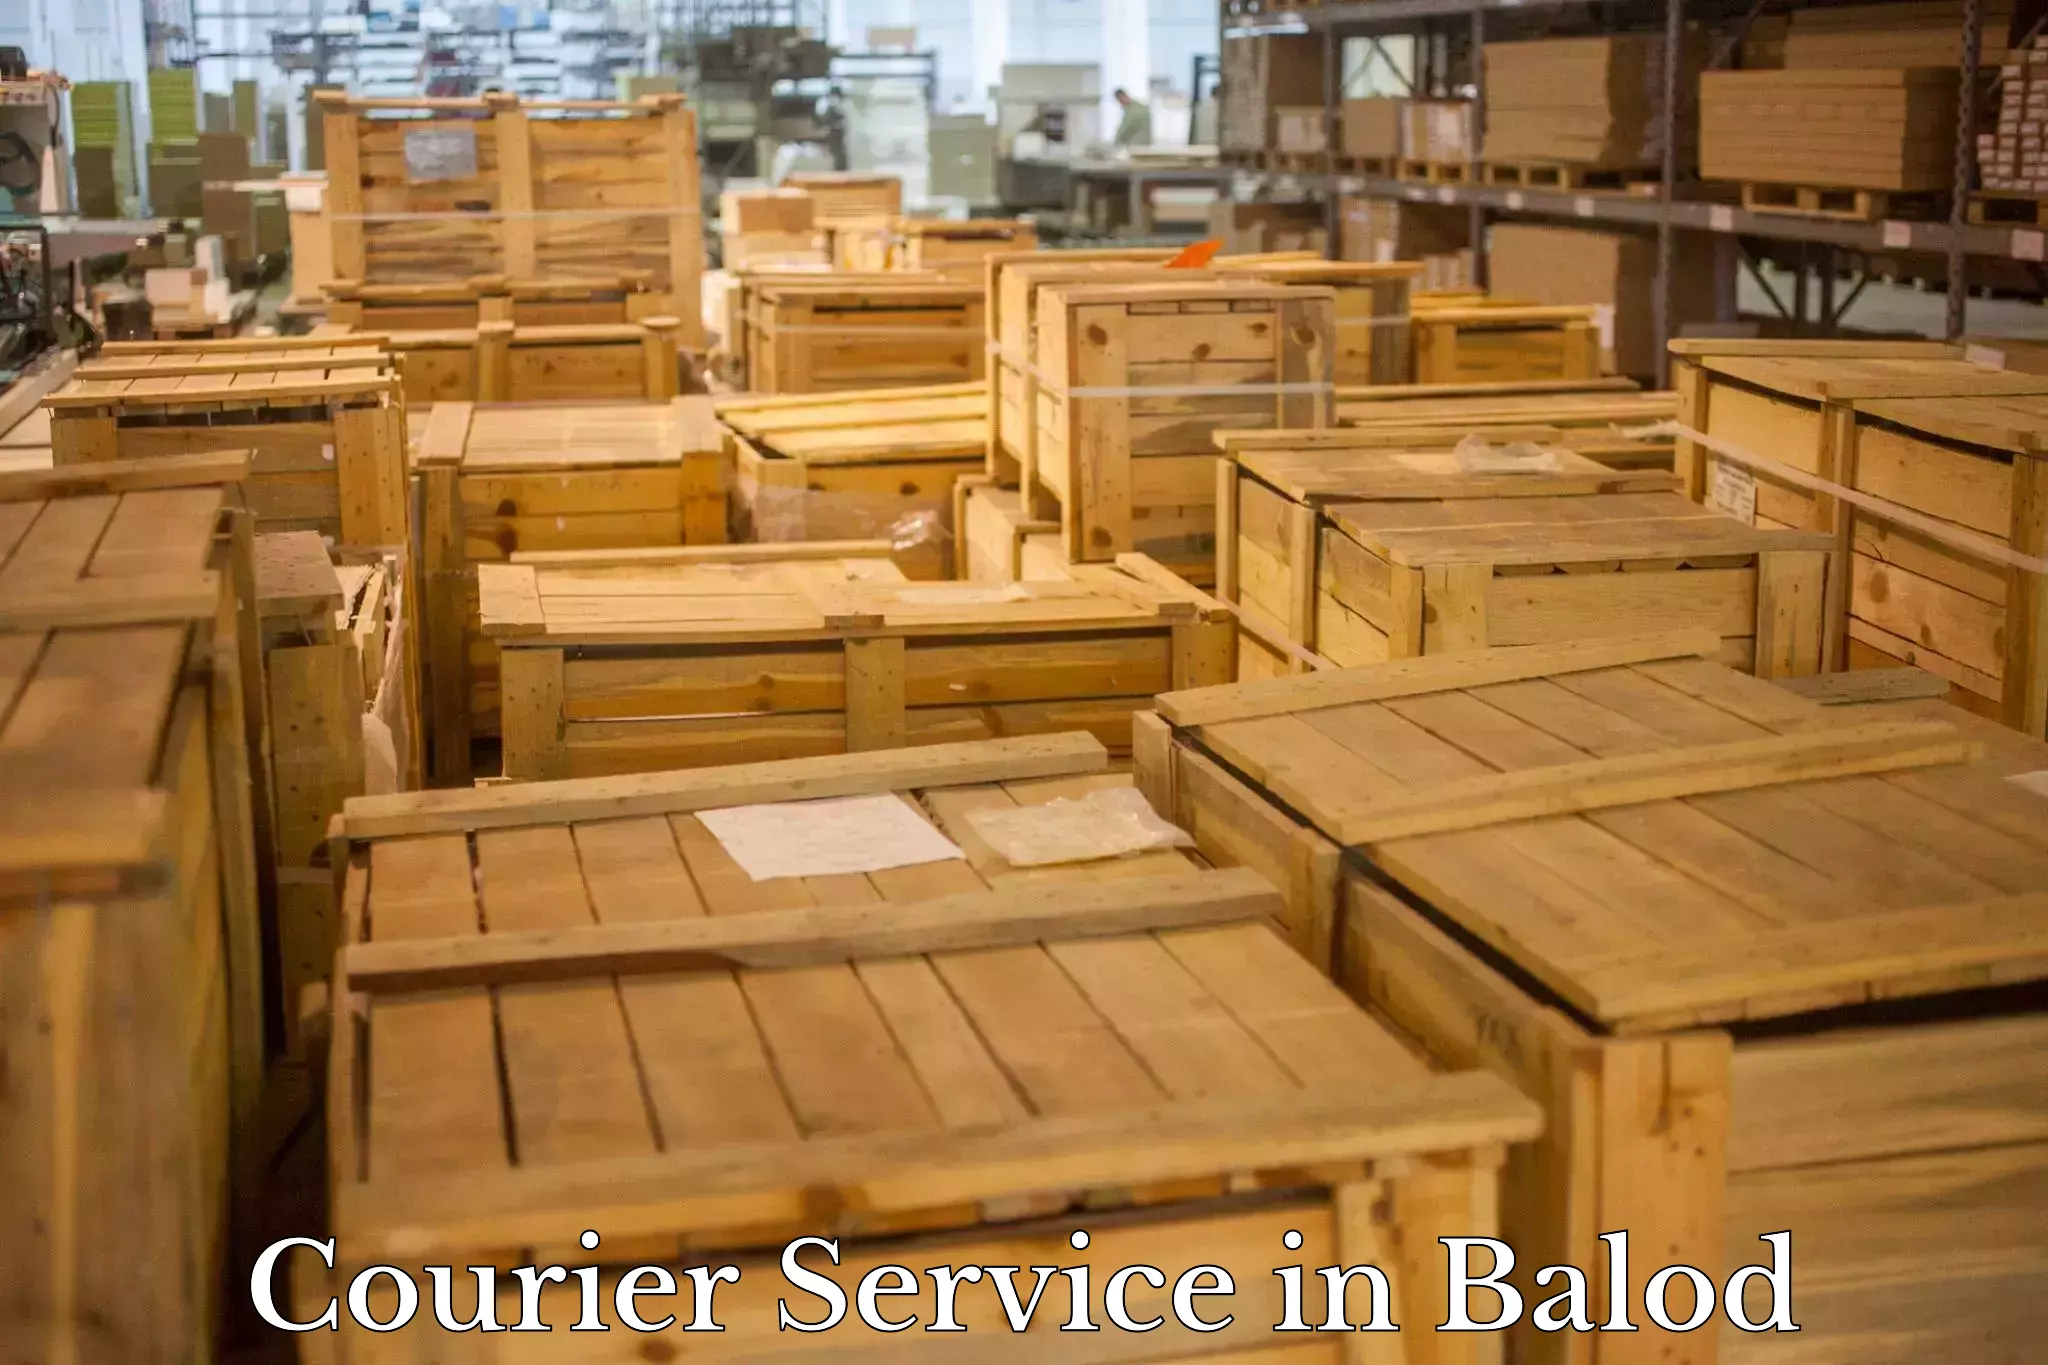 Next-day freight services in Balod